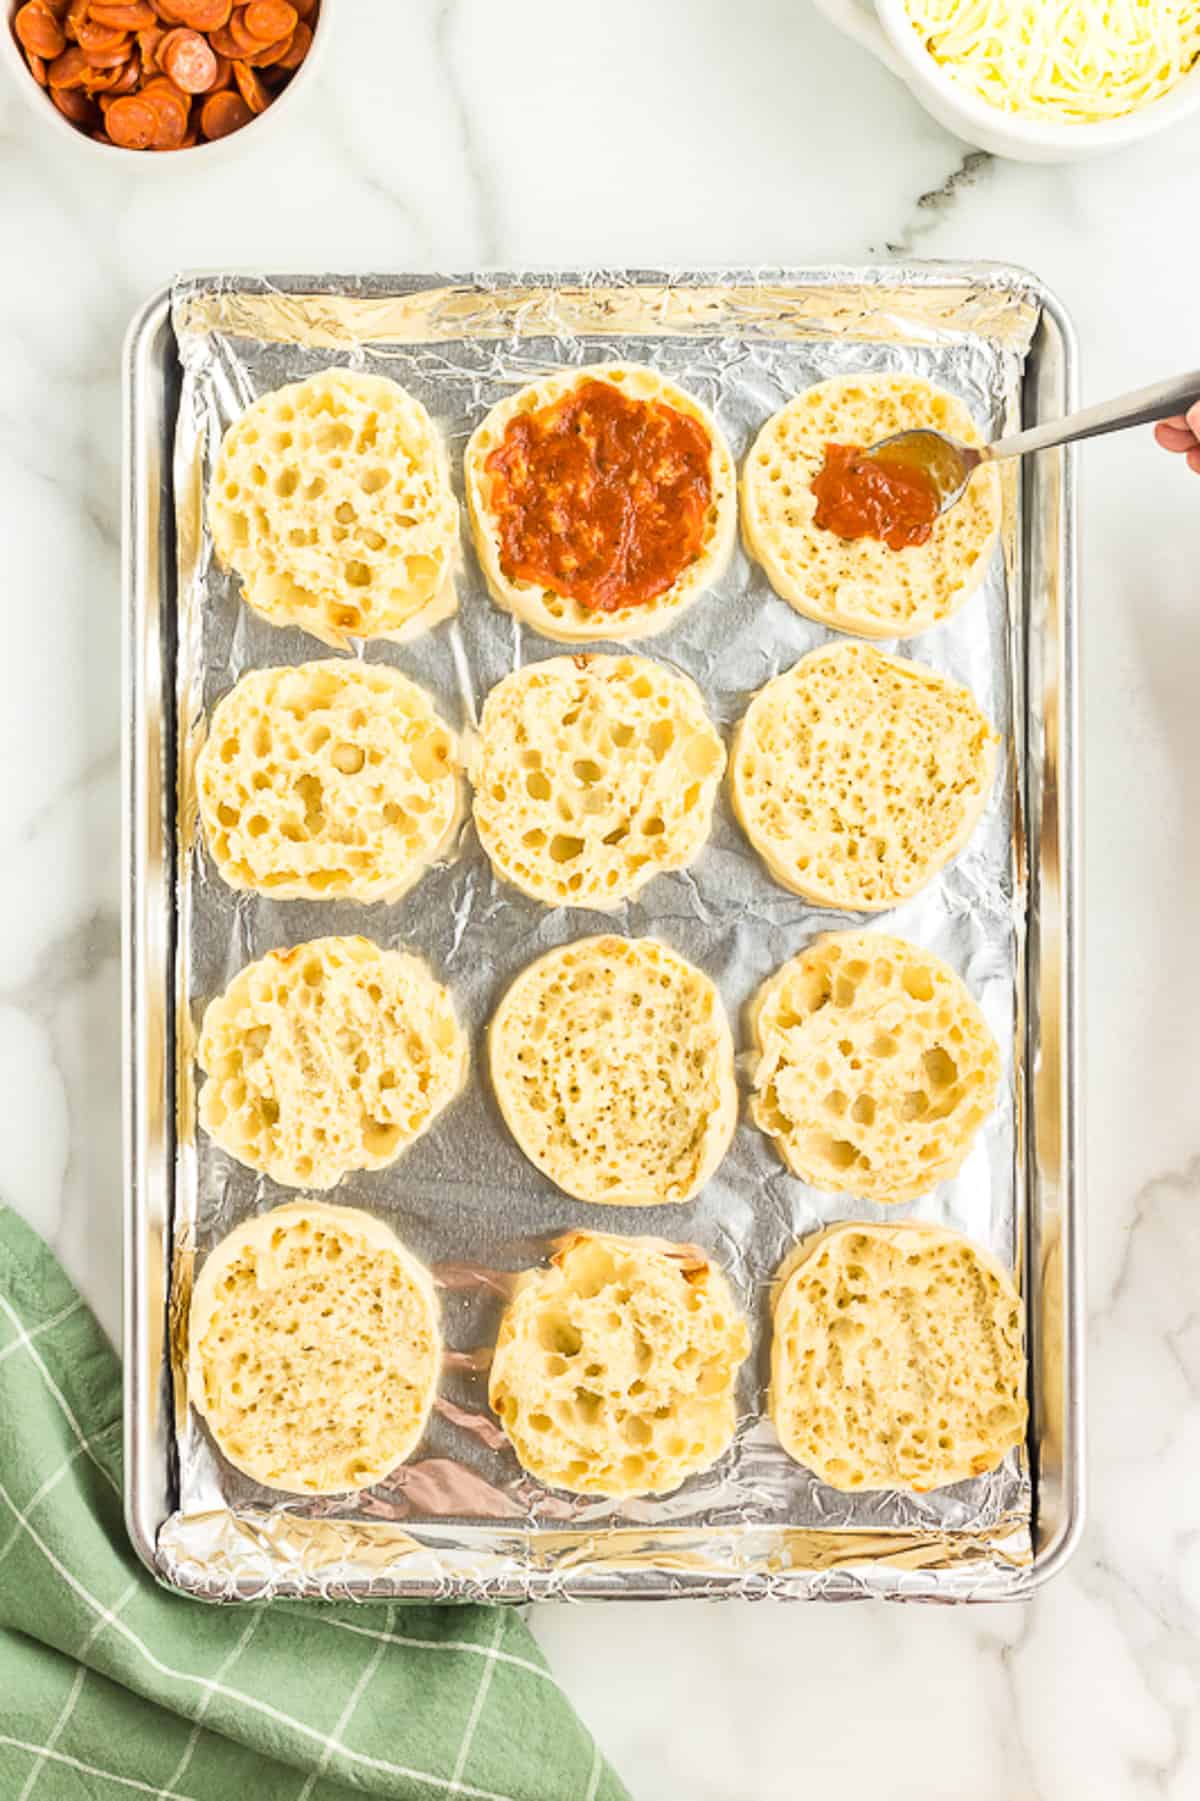 Add Pizza Sauce to the English Muffins